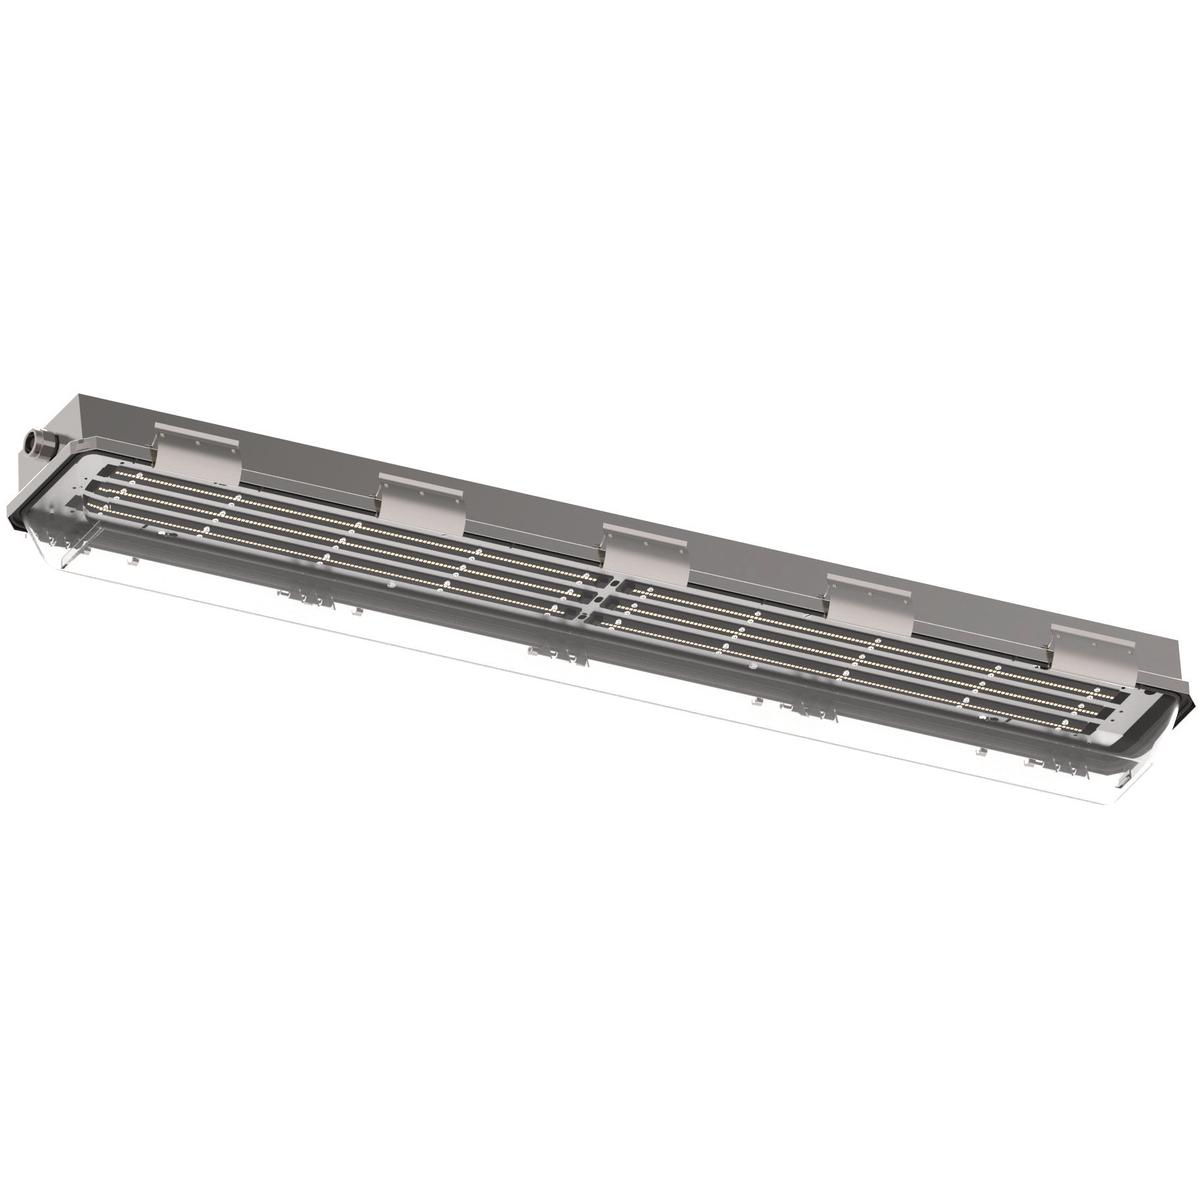 Hubbell LZ2SL4530 LZ2SL Series Linear LED fixtures are made of a 316 Stainless Steel body with an impact resistant polycarbonate lens and use energy efficient LED's  that are suitable for use in harsh and hazardous environments.  ; Supplemental 20KA/10KV Surge Protection i